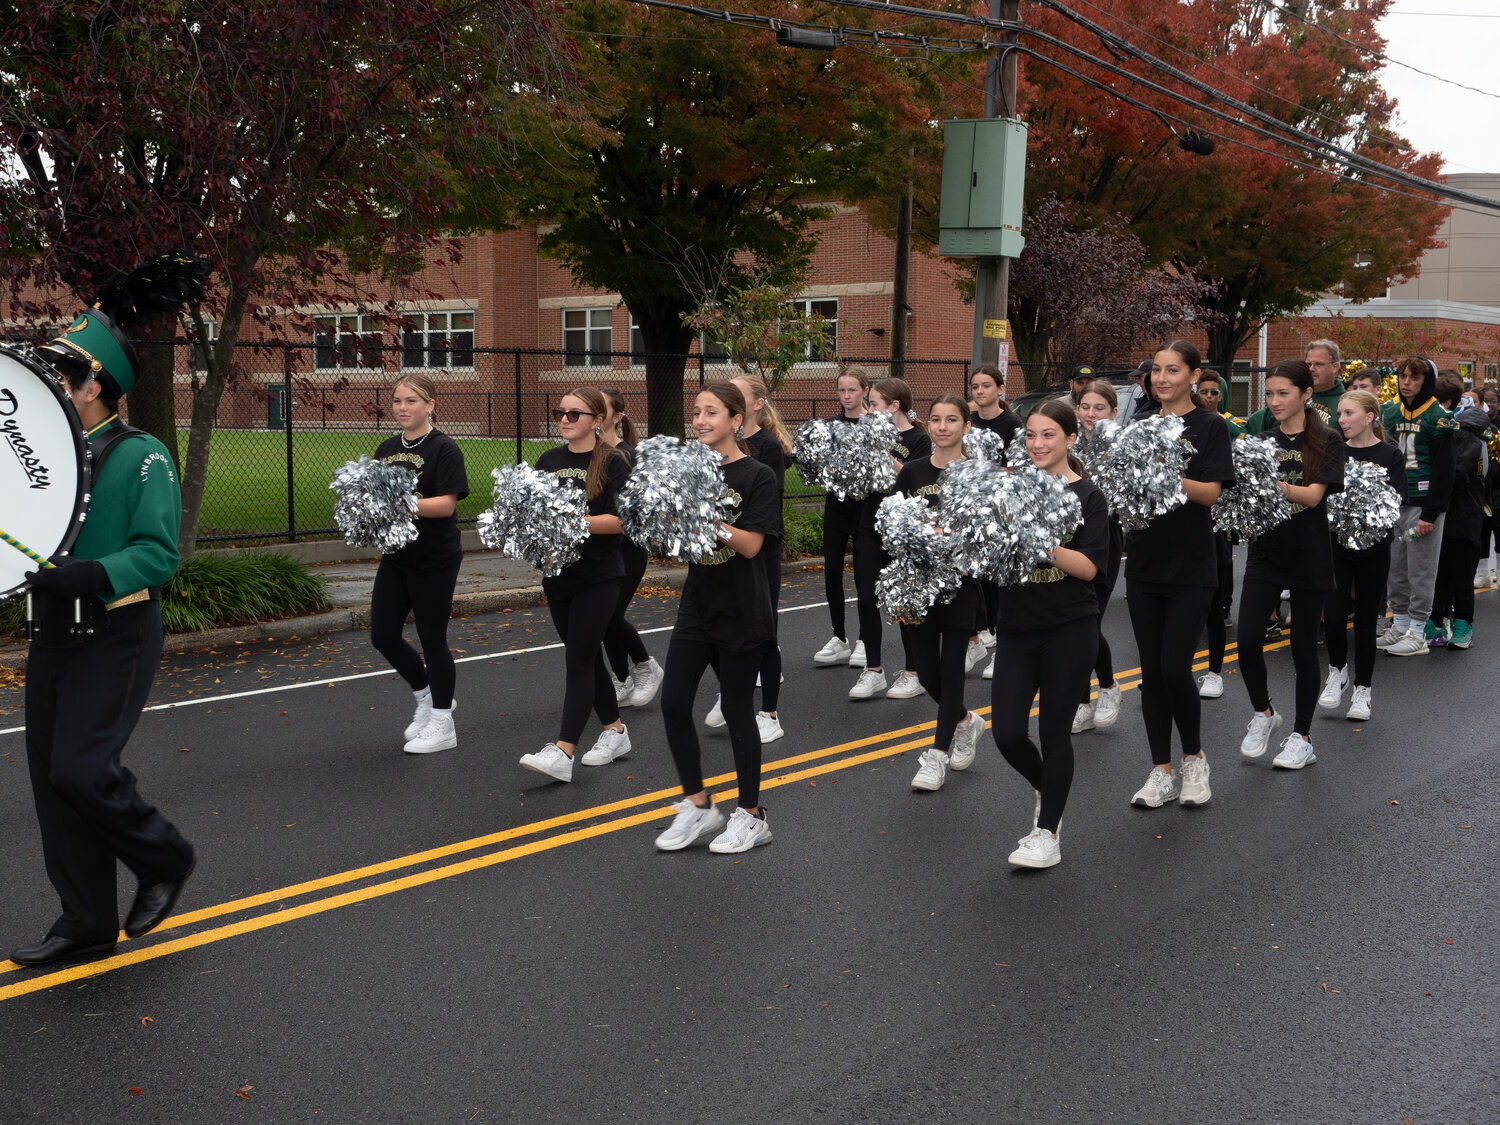 The kickline team added enthusiasm during the parade.